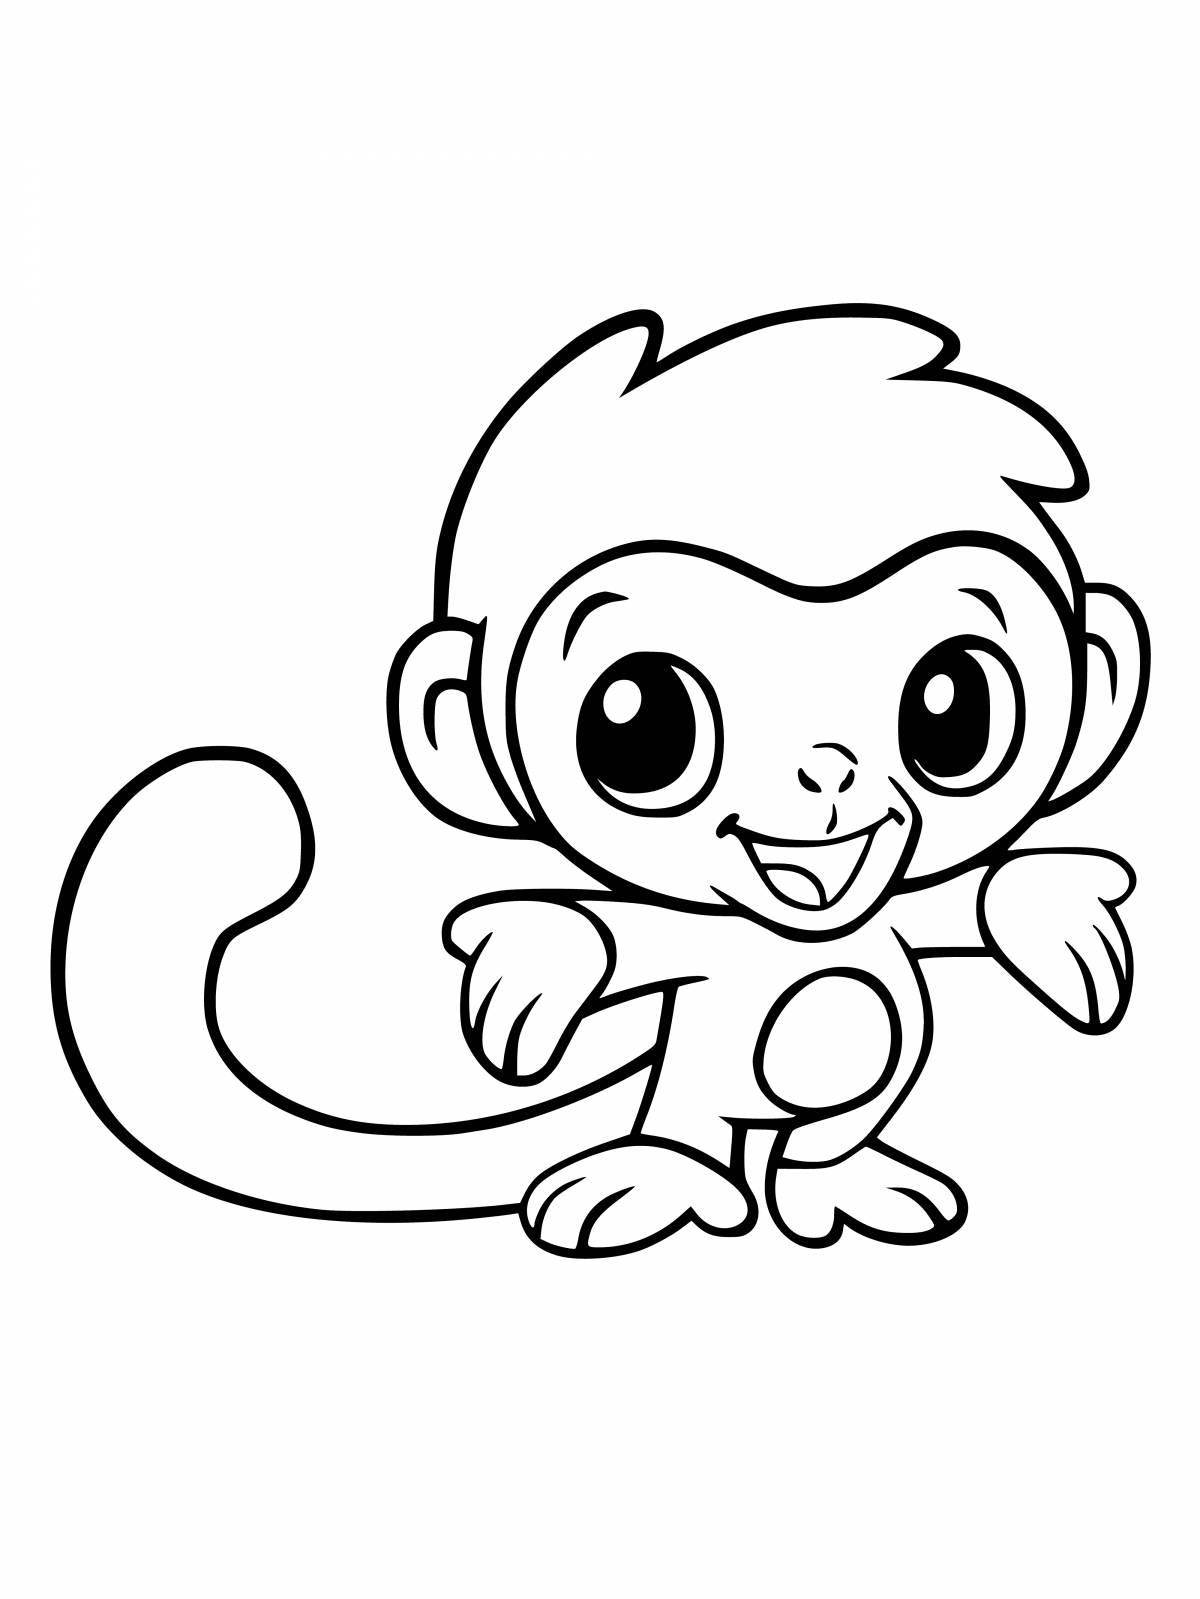 Animated monkey coloring book for kids